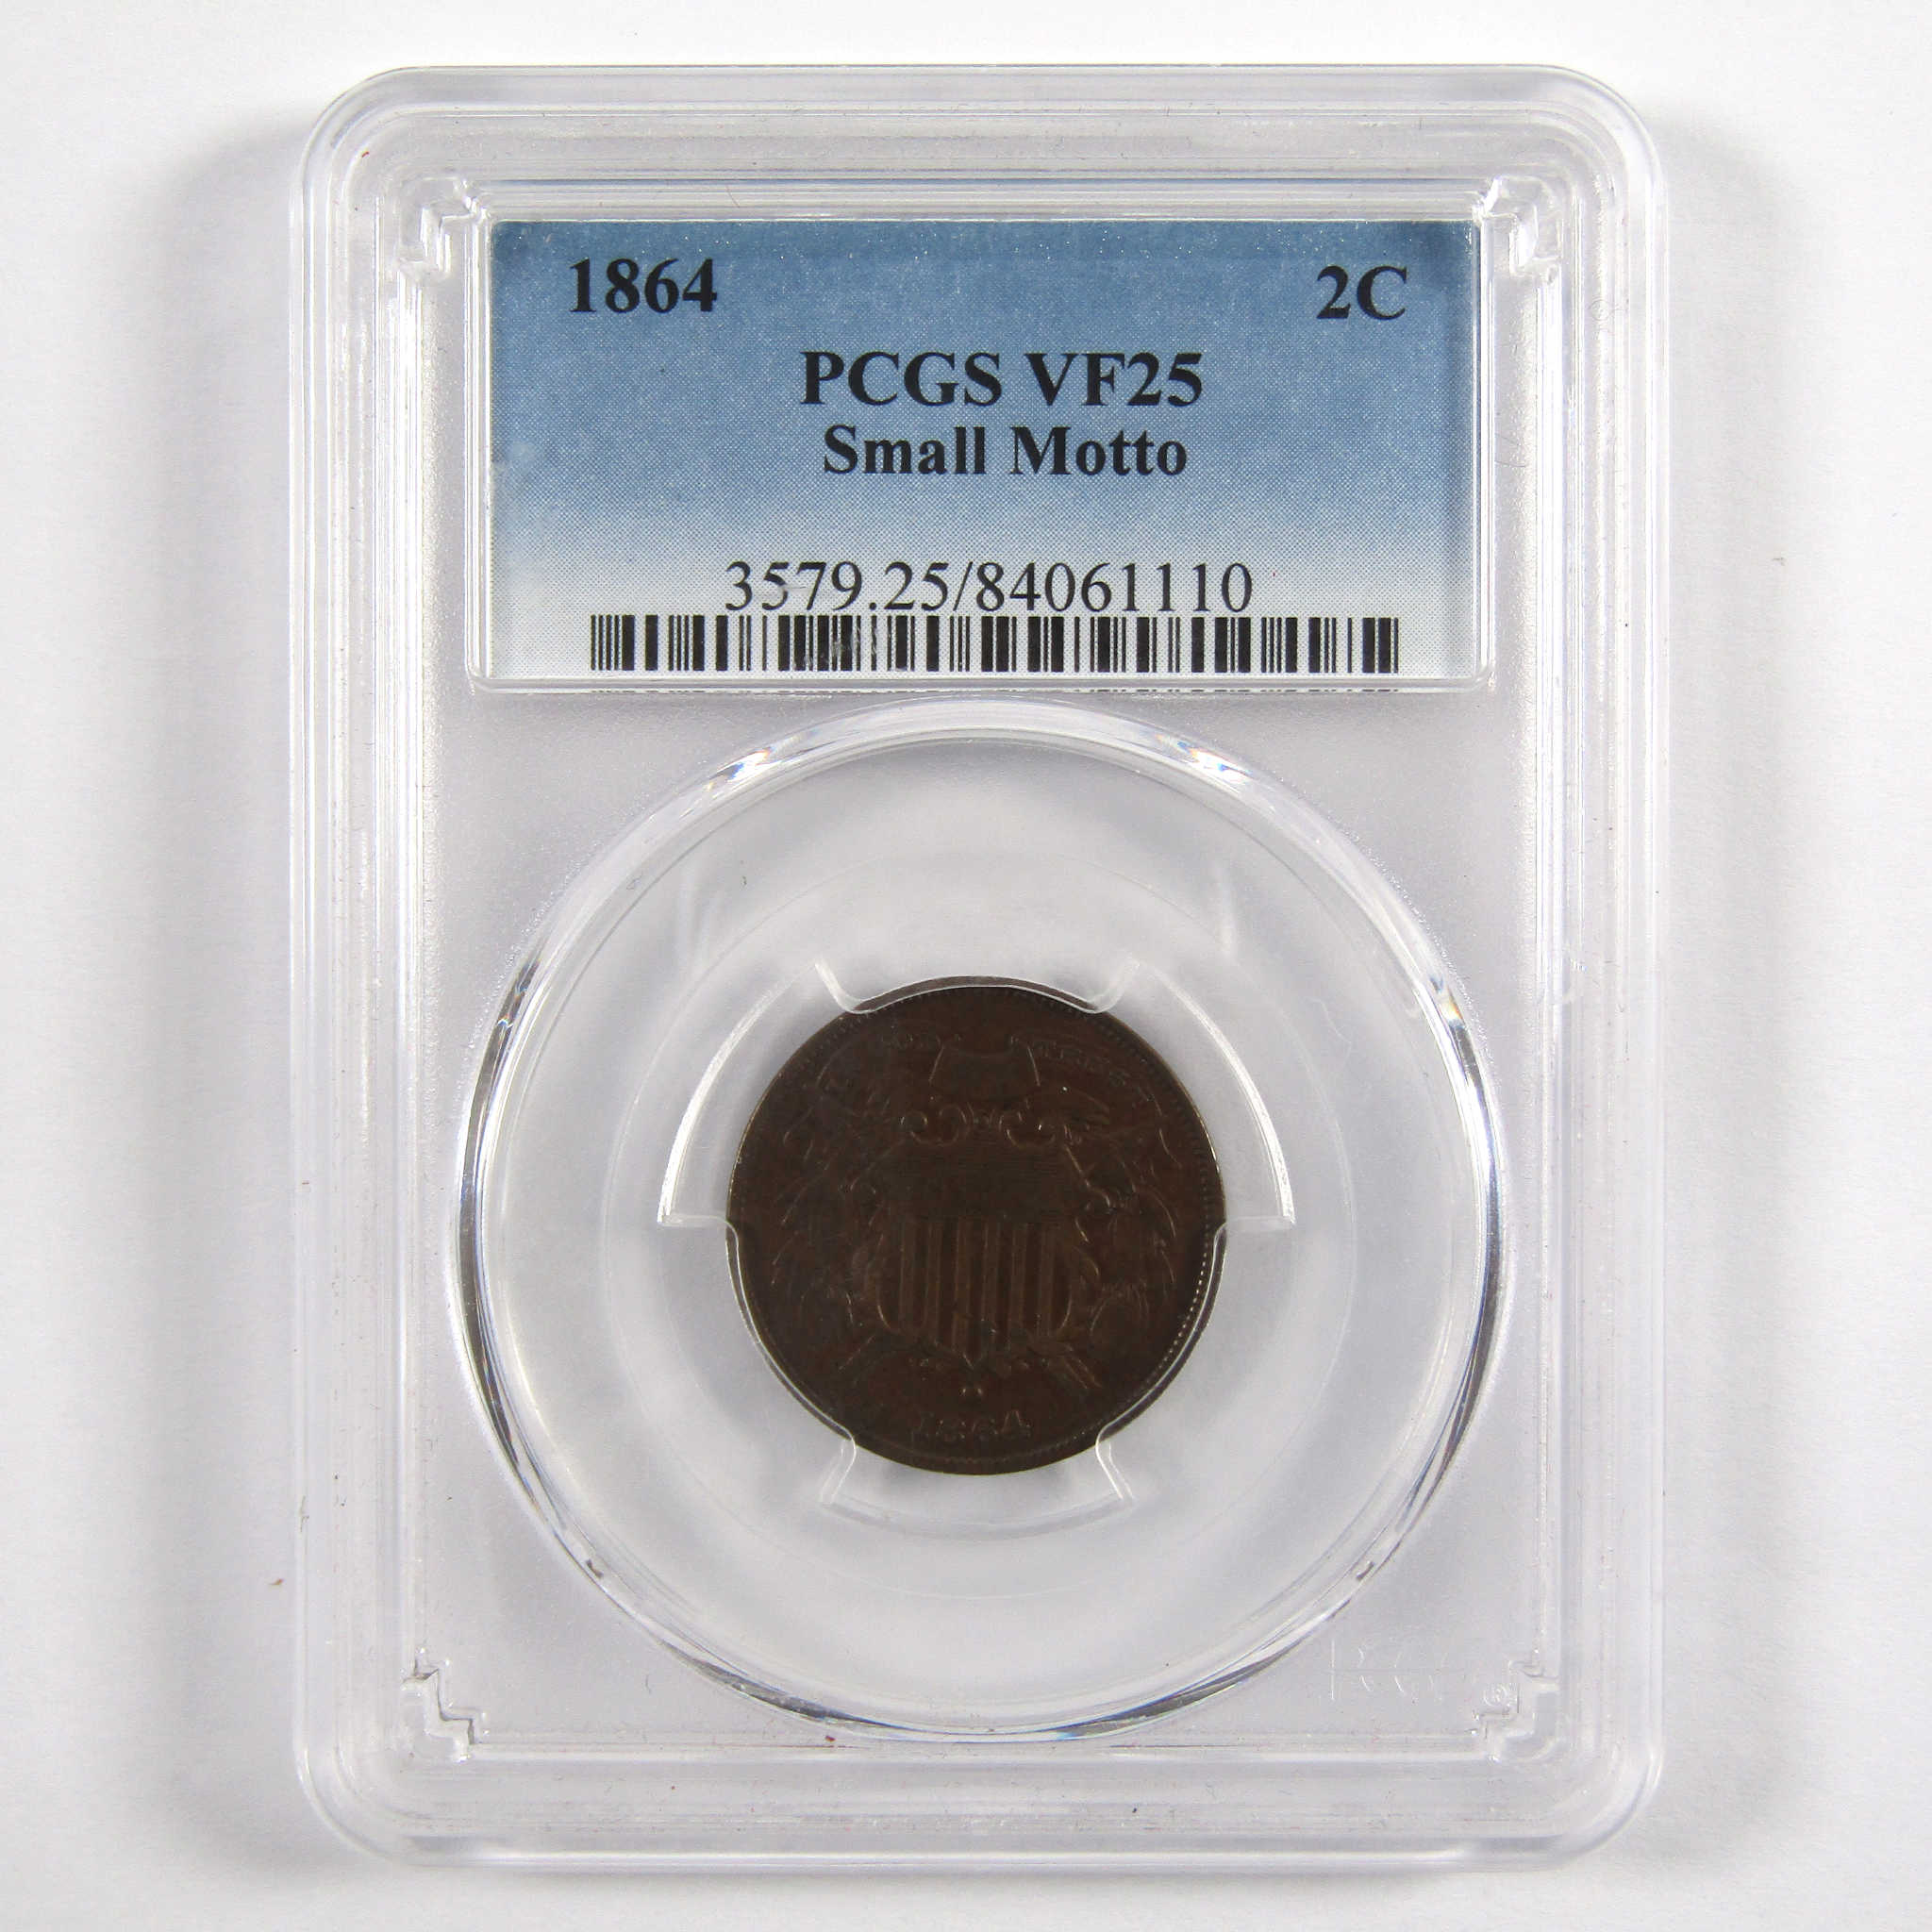 1864 Small Motto Two Cent Piece VF 25 PCGS 2c Coin SKU:I11100